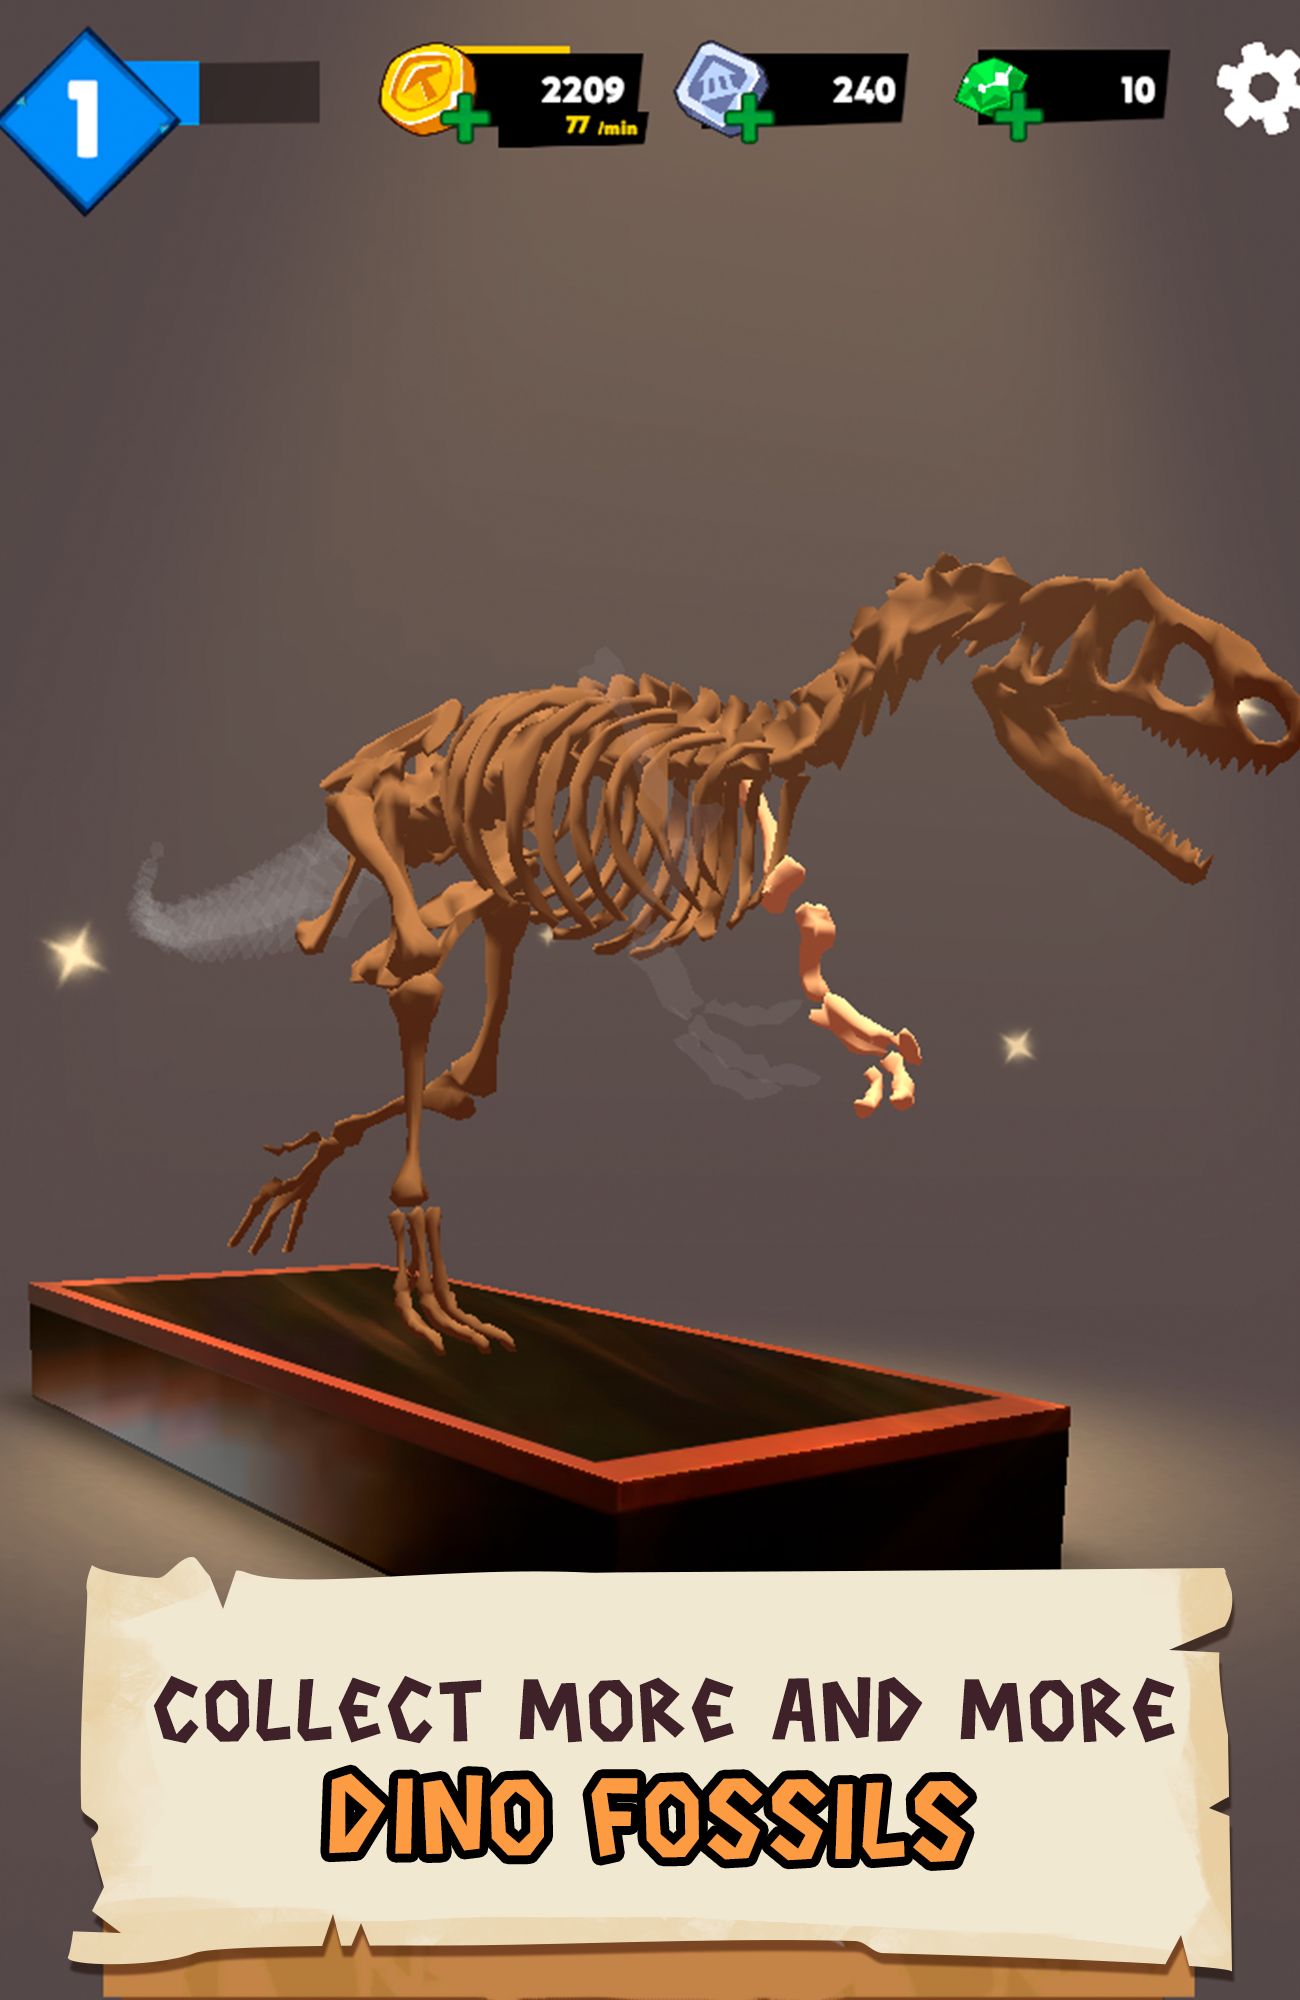 Dino Quest 2: Jurassic bones in 3D Dinosaur World for Android